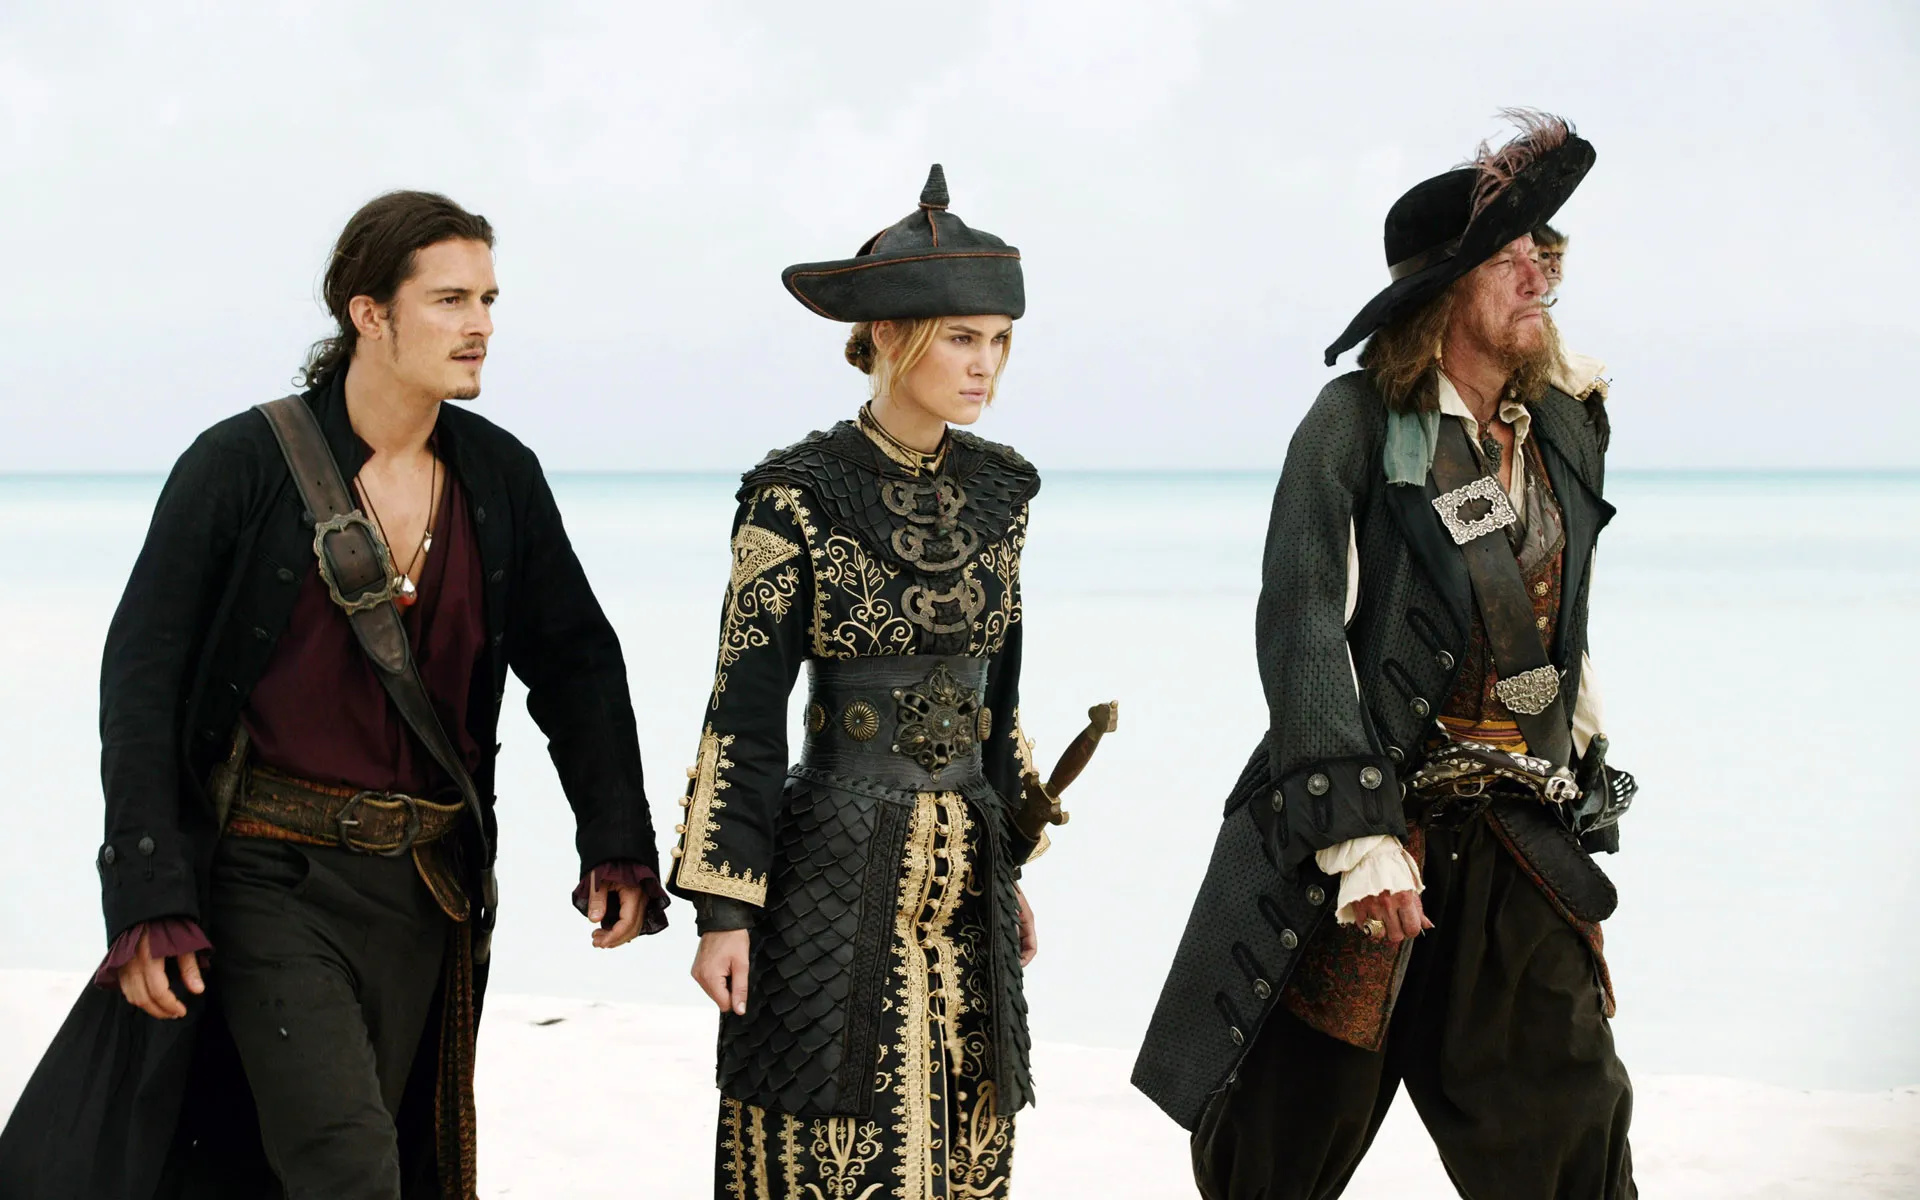 Pirates of the Caribbean, Trilogy wallpapers, Movie wallpapers, 1920x1200 HD Desktop